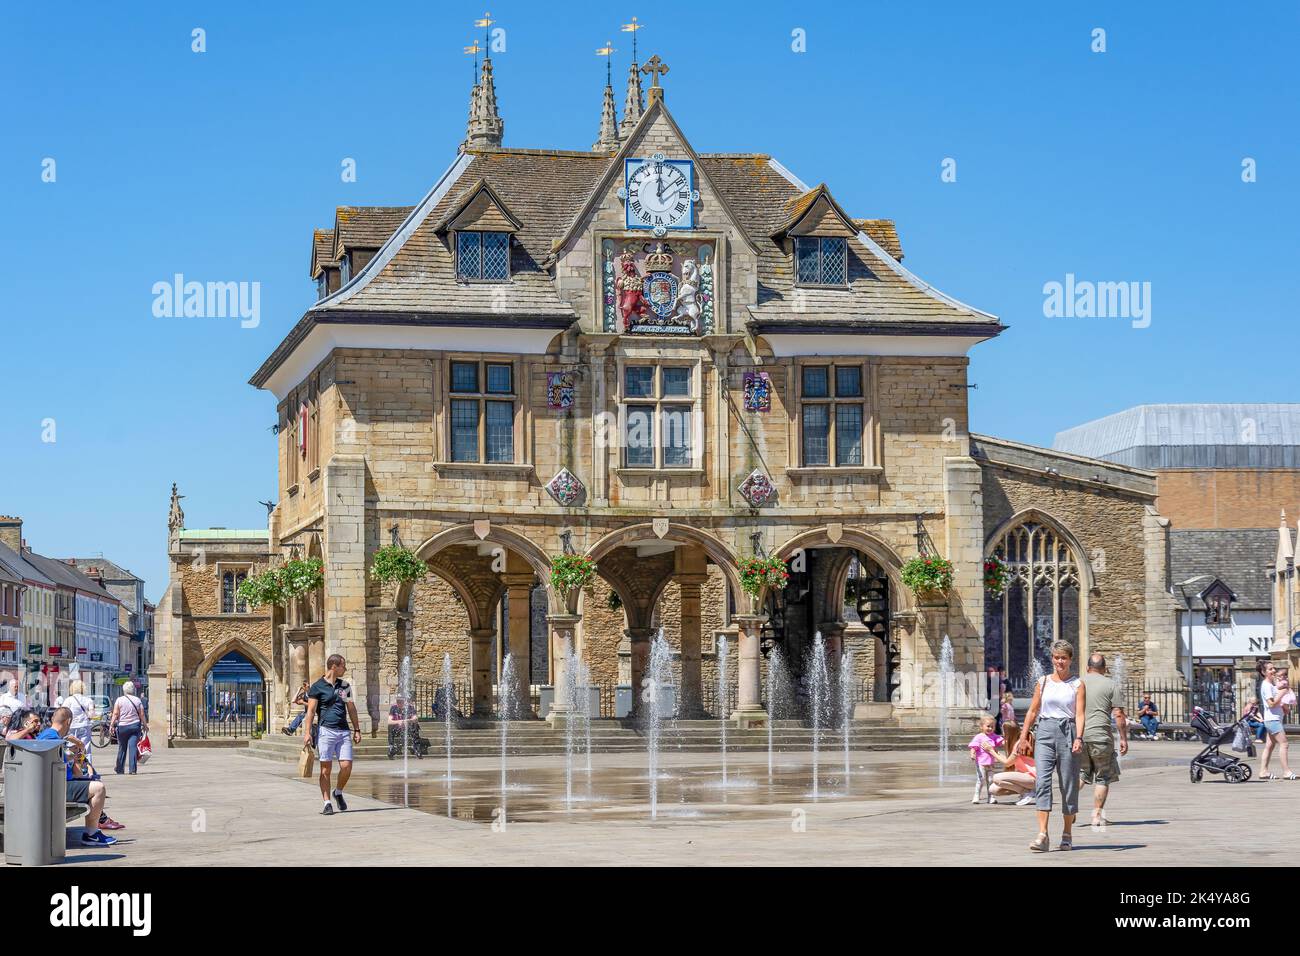 17th century The Guildhall (Butter Cross), Cathedral Square, Peterborough, Cambridgeshire, England, United Kingdom Stock Photo